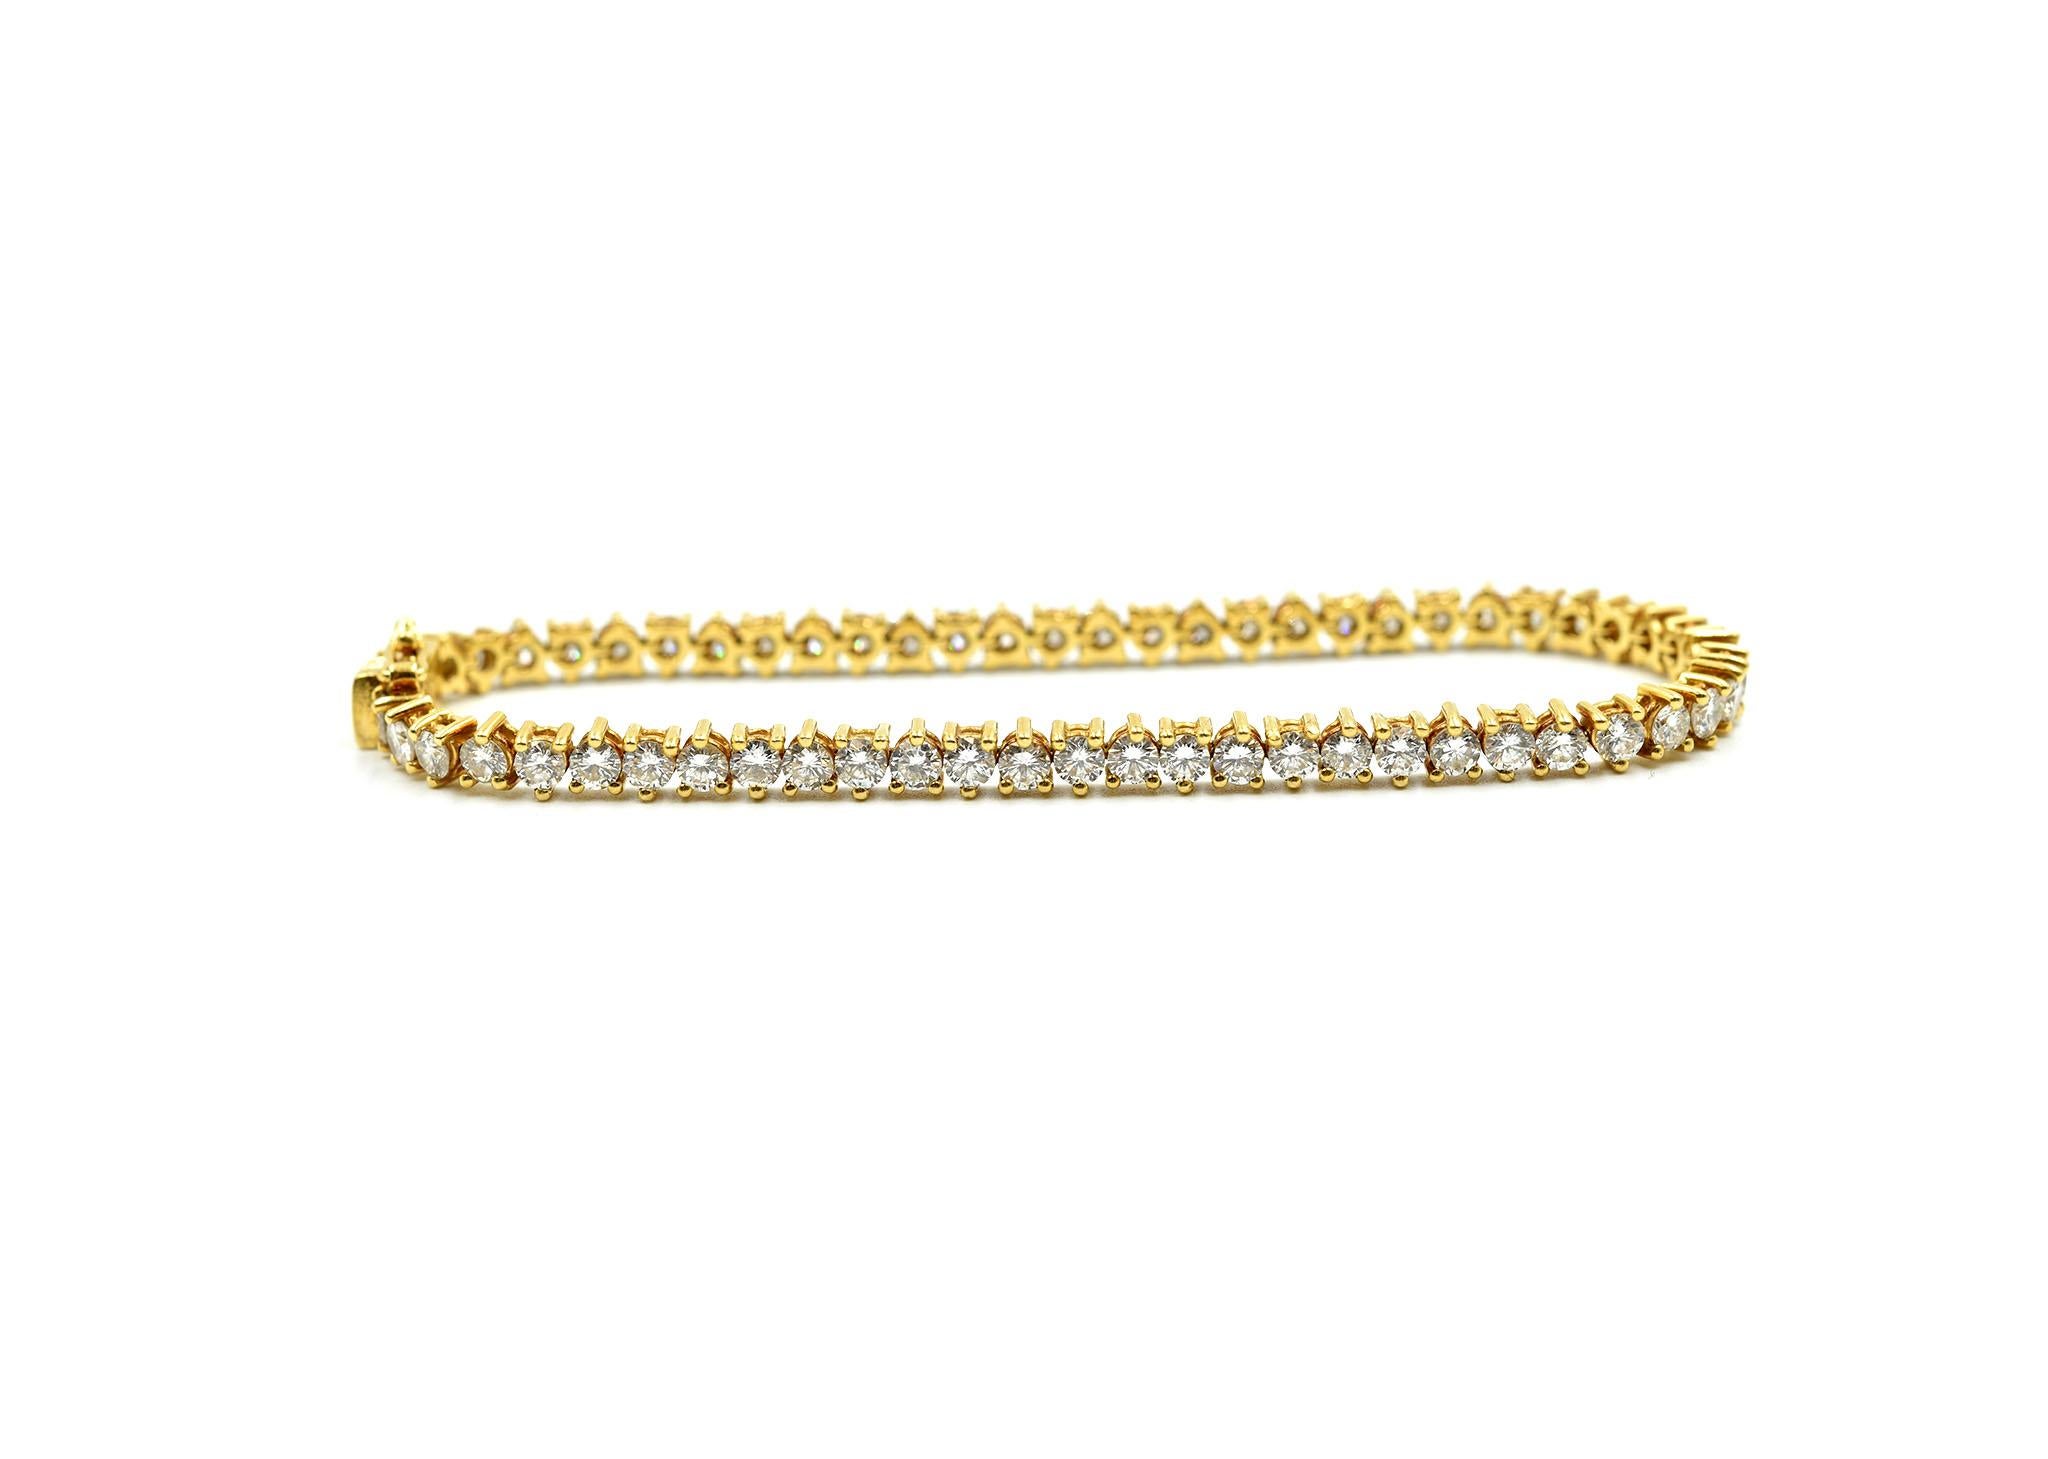 Designer: custom design
Material: 18k yellow gold
Diamonds: 60 round brilliant cuts = 6.60 carat total weight
Color: G
Clarity: VS2
Dimensions: bracelet will fit 6 ¾-inch wrist
Weight: 11.80 grams
